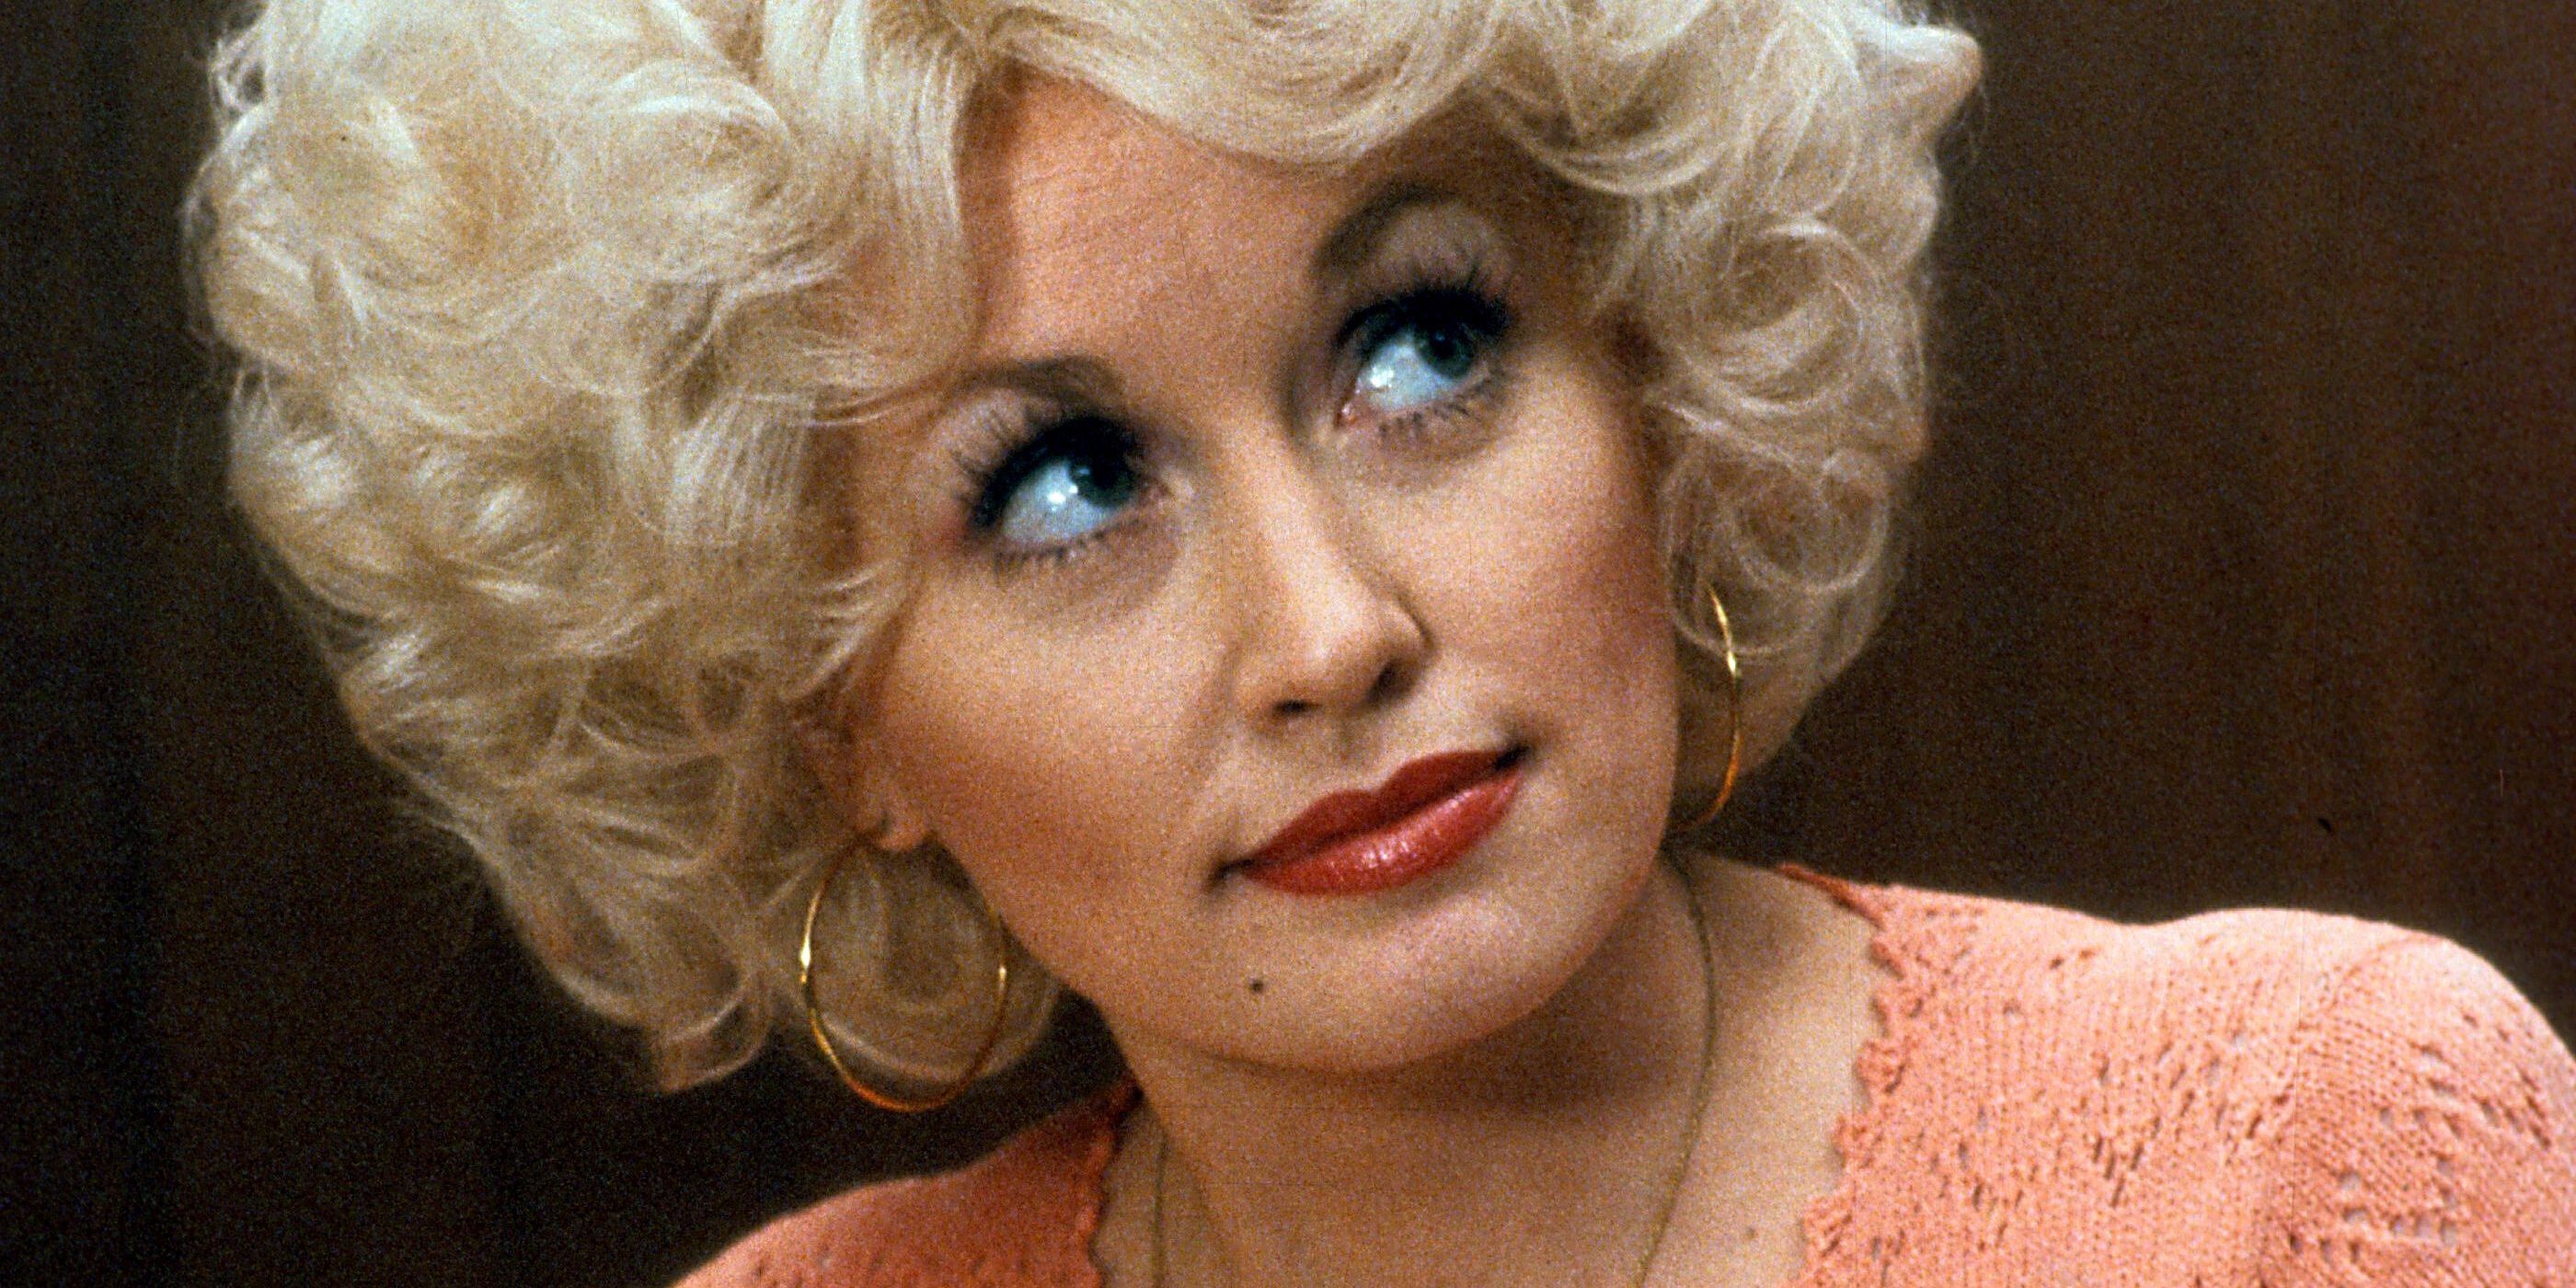 Dolly Parton in 9 to 5 looking up and off camera.